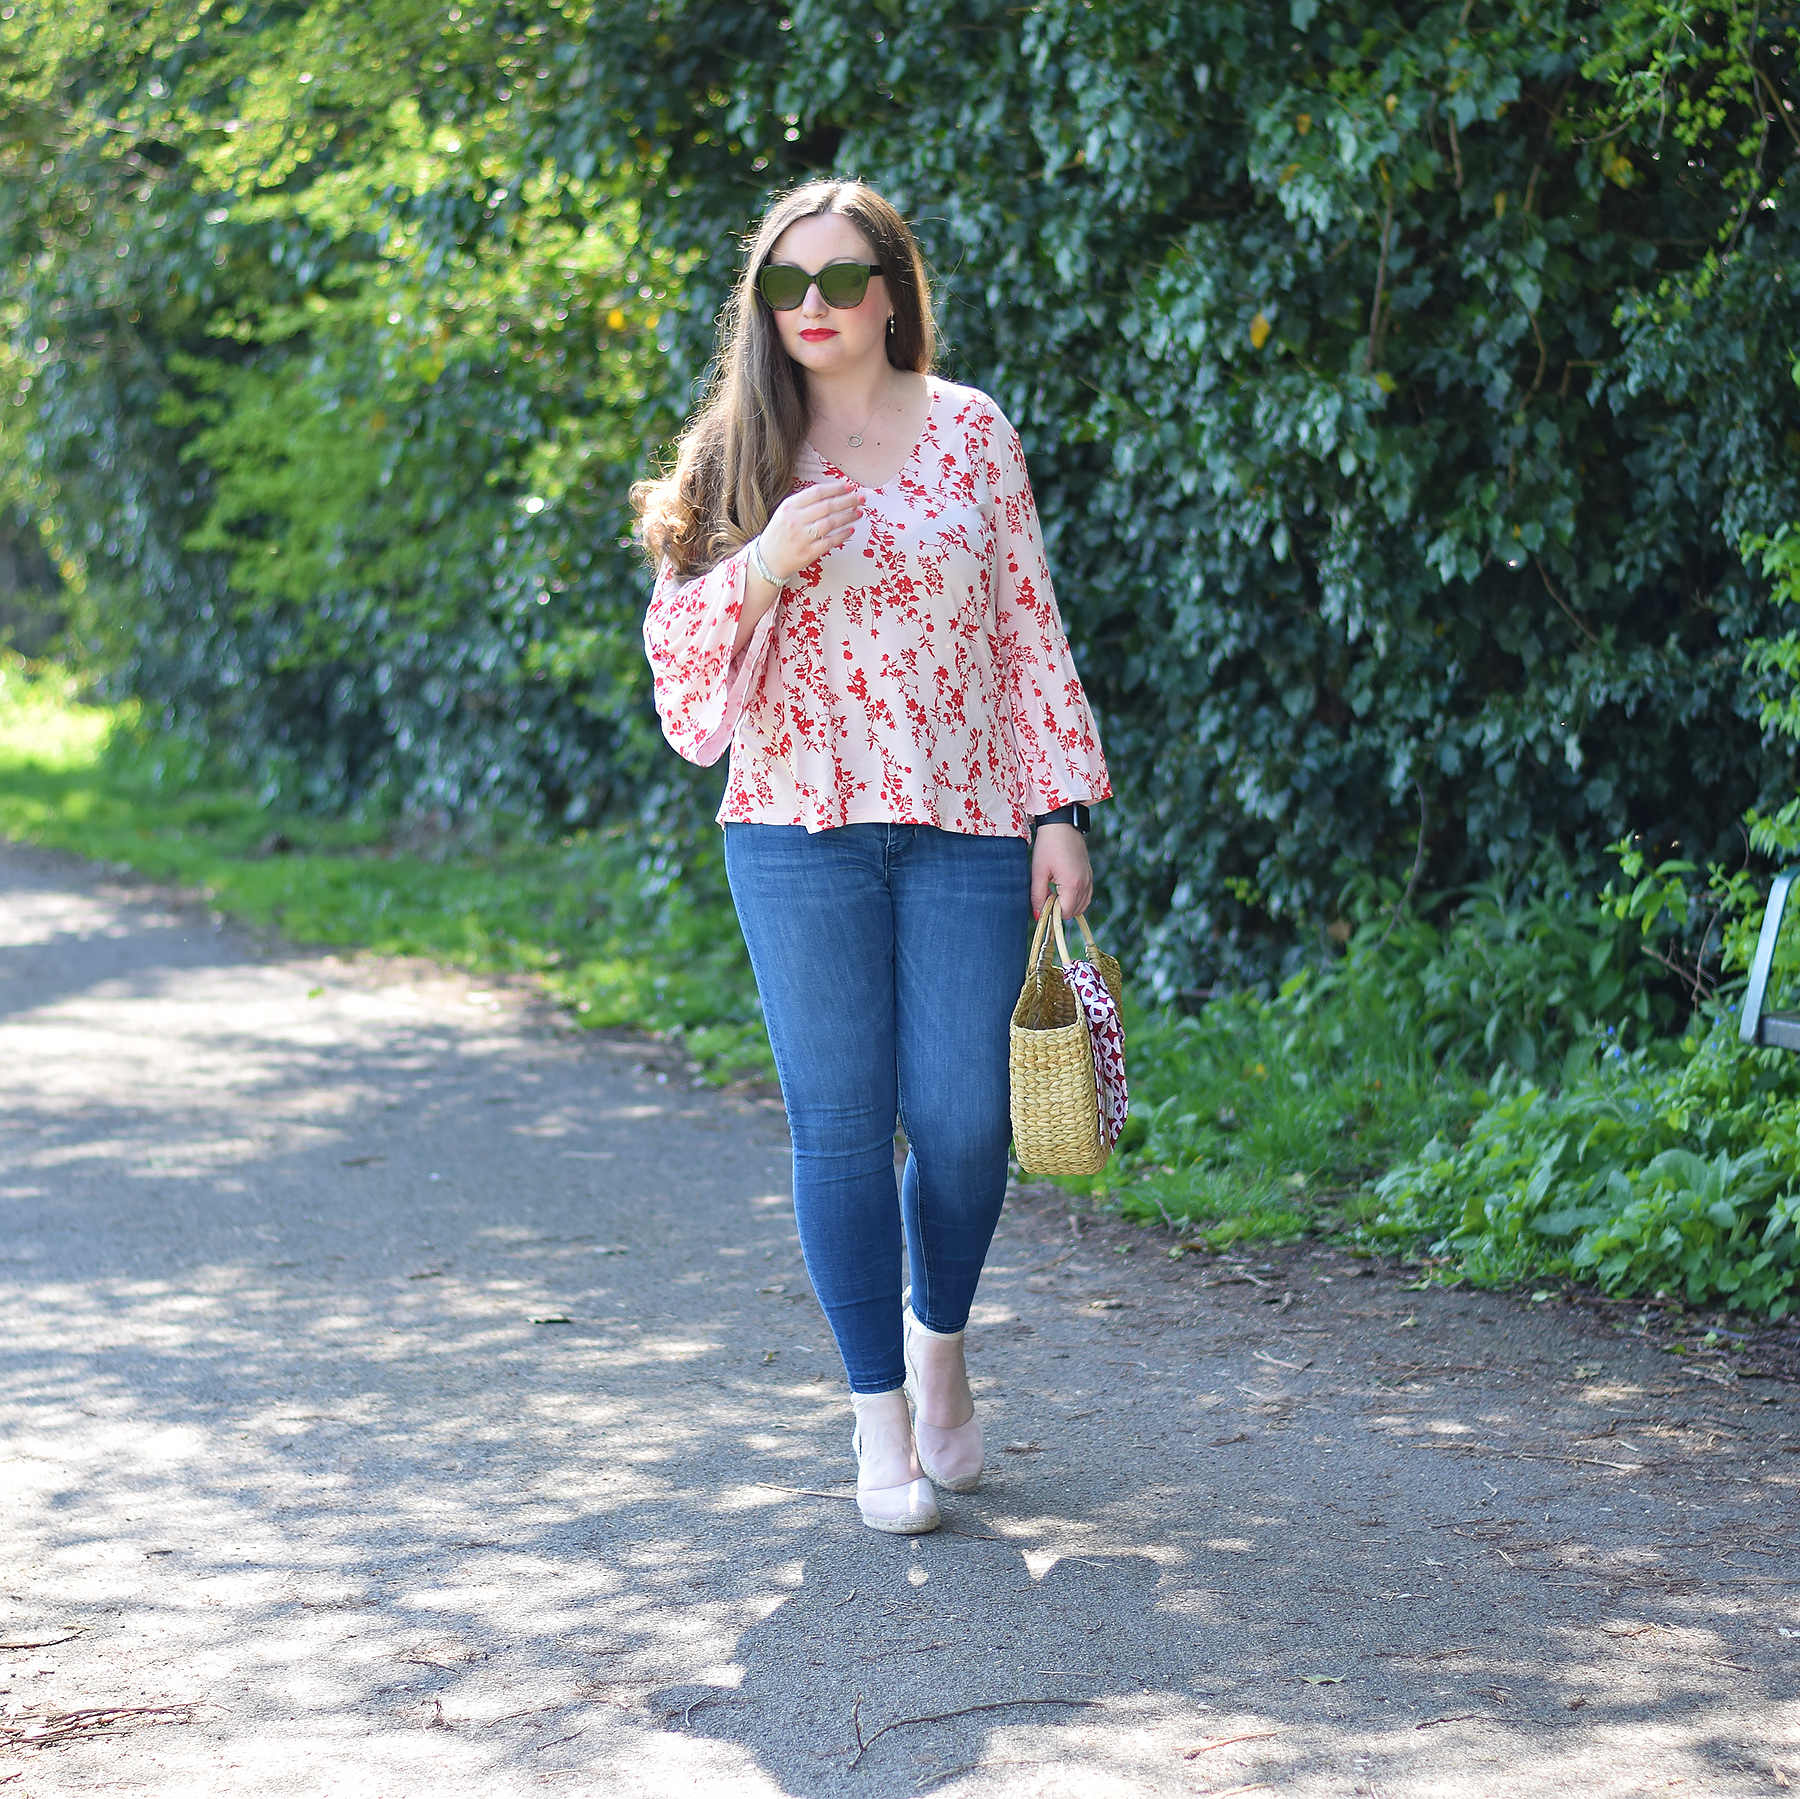 Gemma From Jacquard Flower UK fashion blog wearing red and pink floral outfit